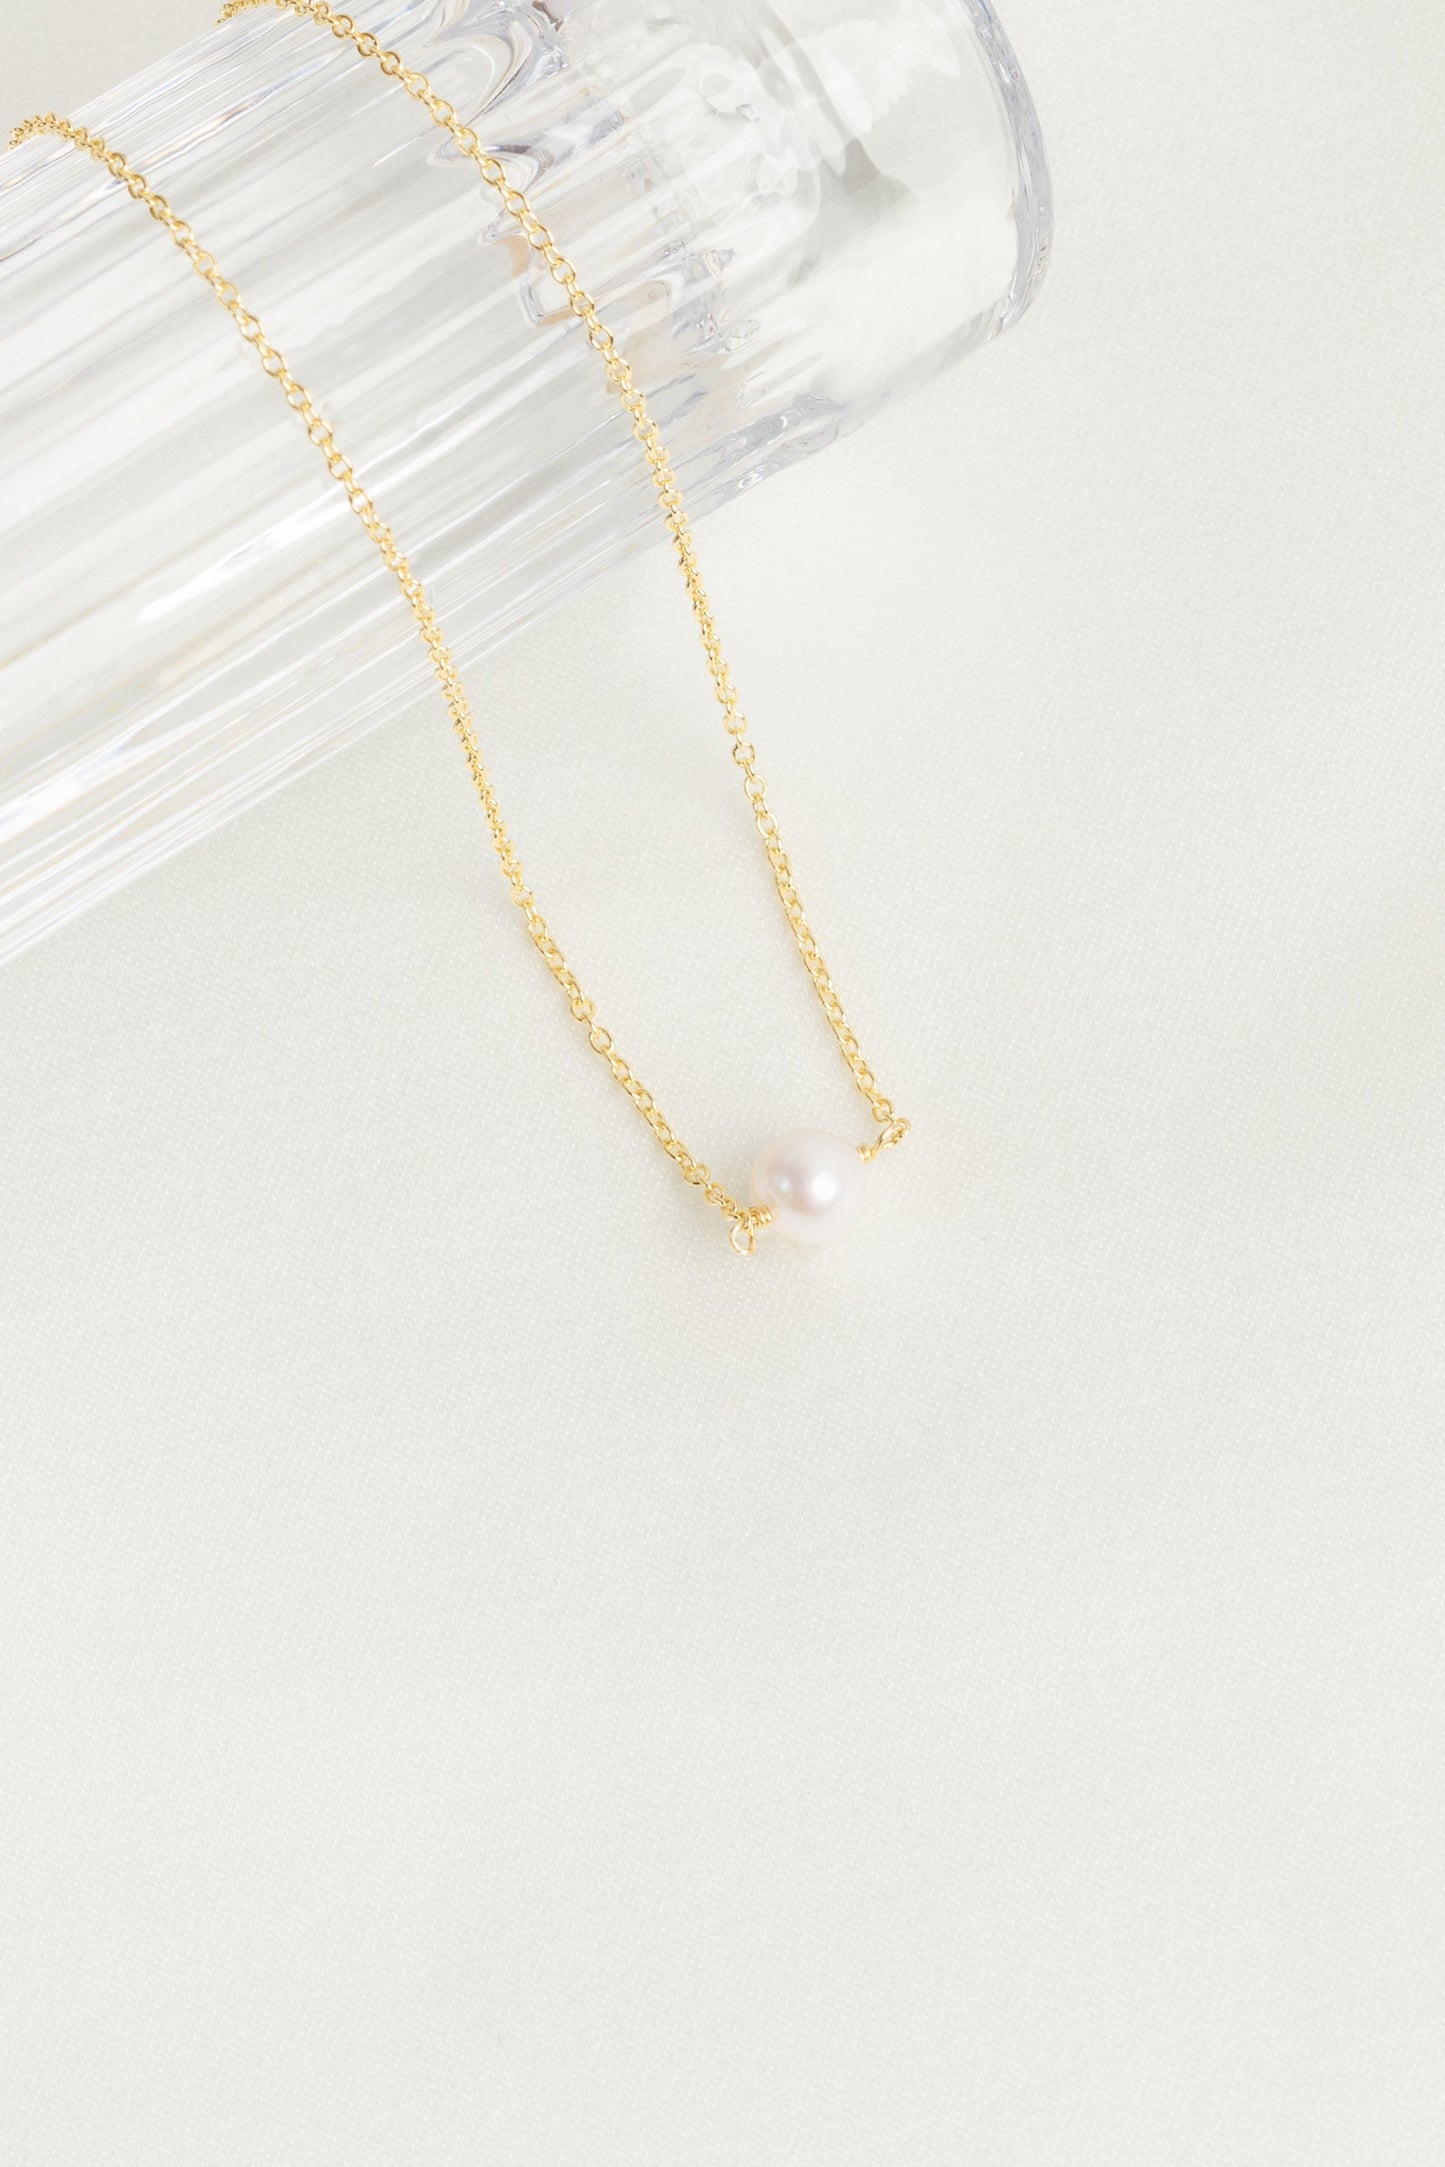 freshwater pearl pendant necklace on a gold chain. displayed draped over a glass on a white background